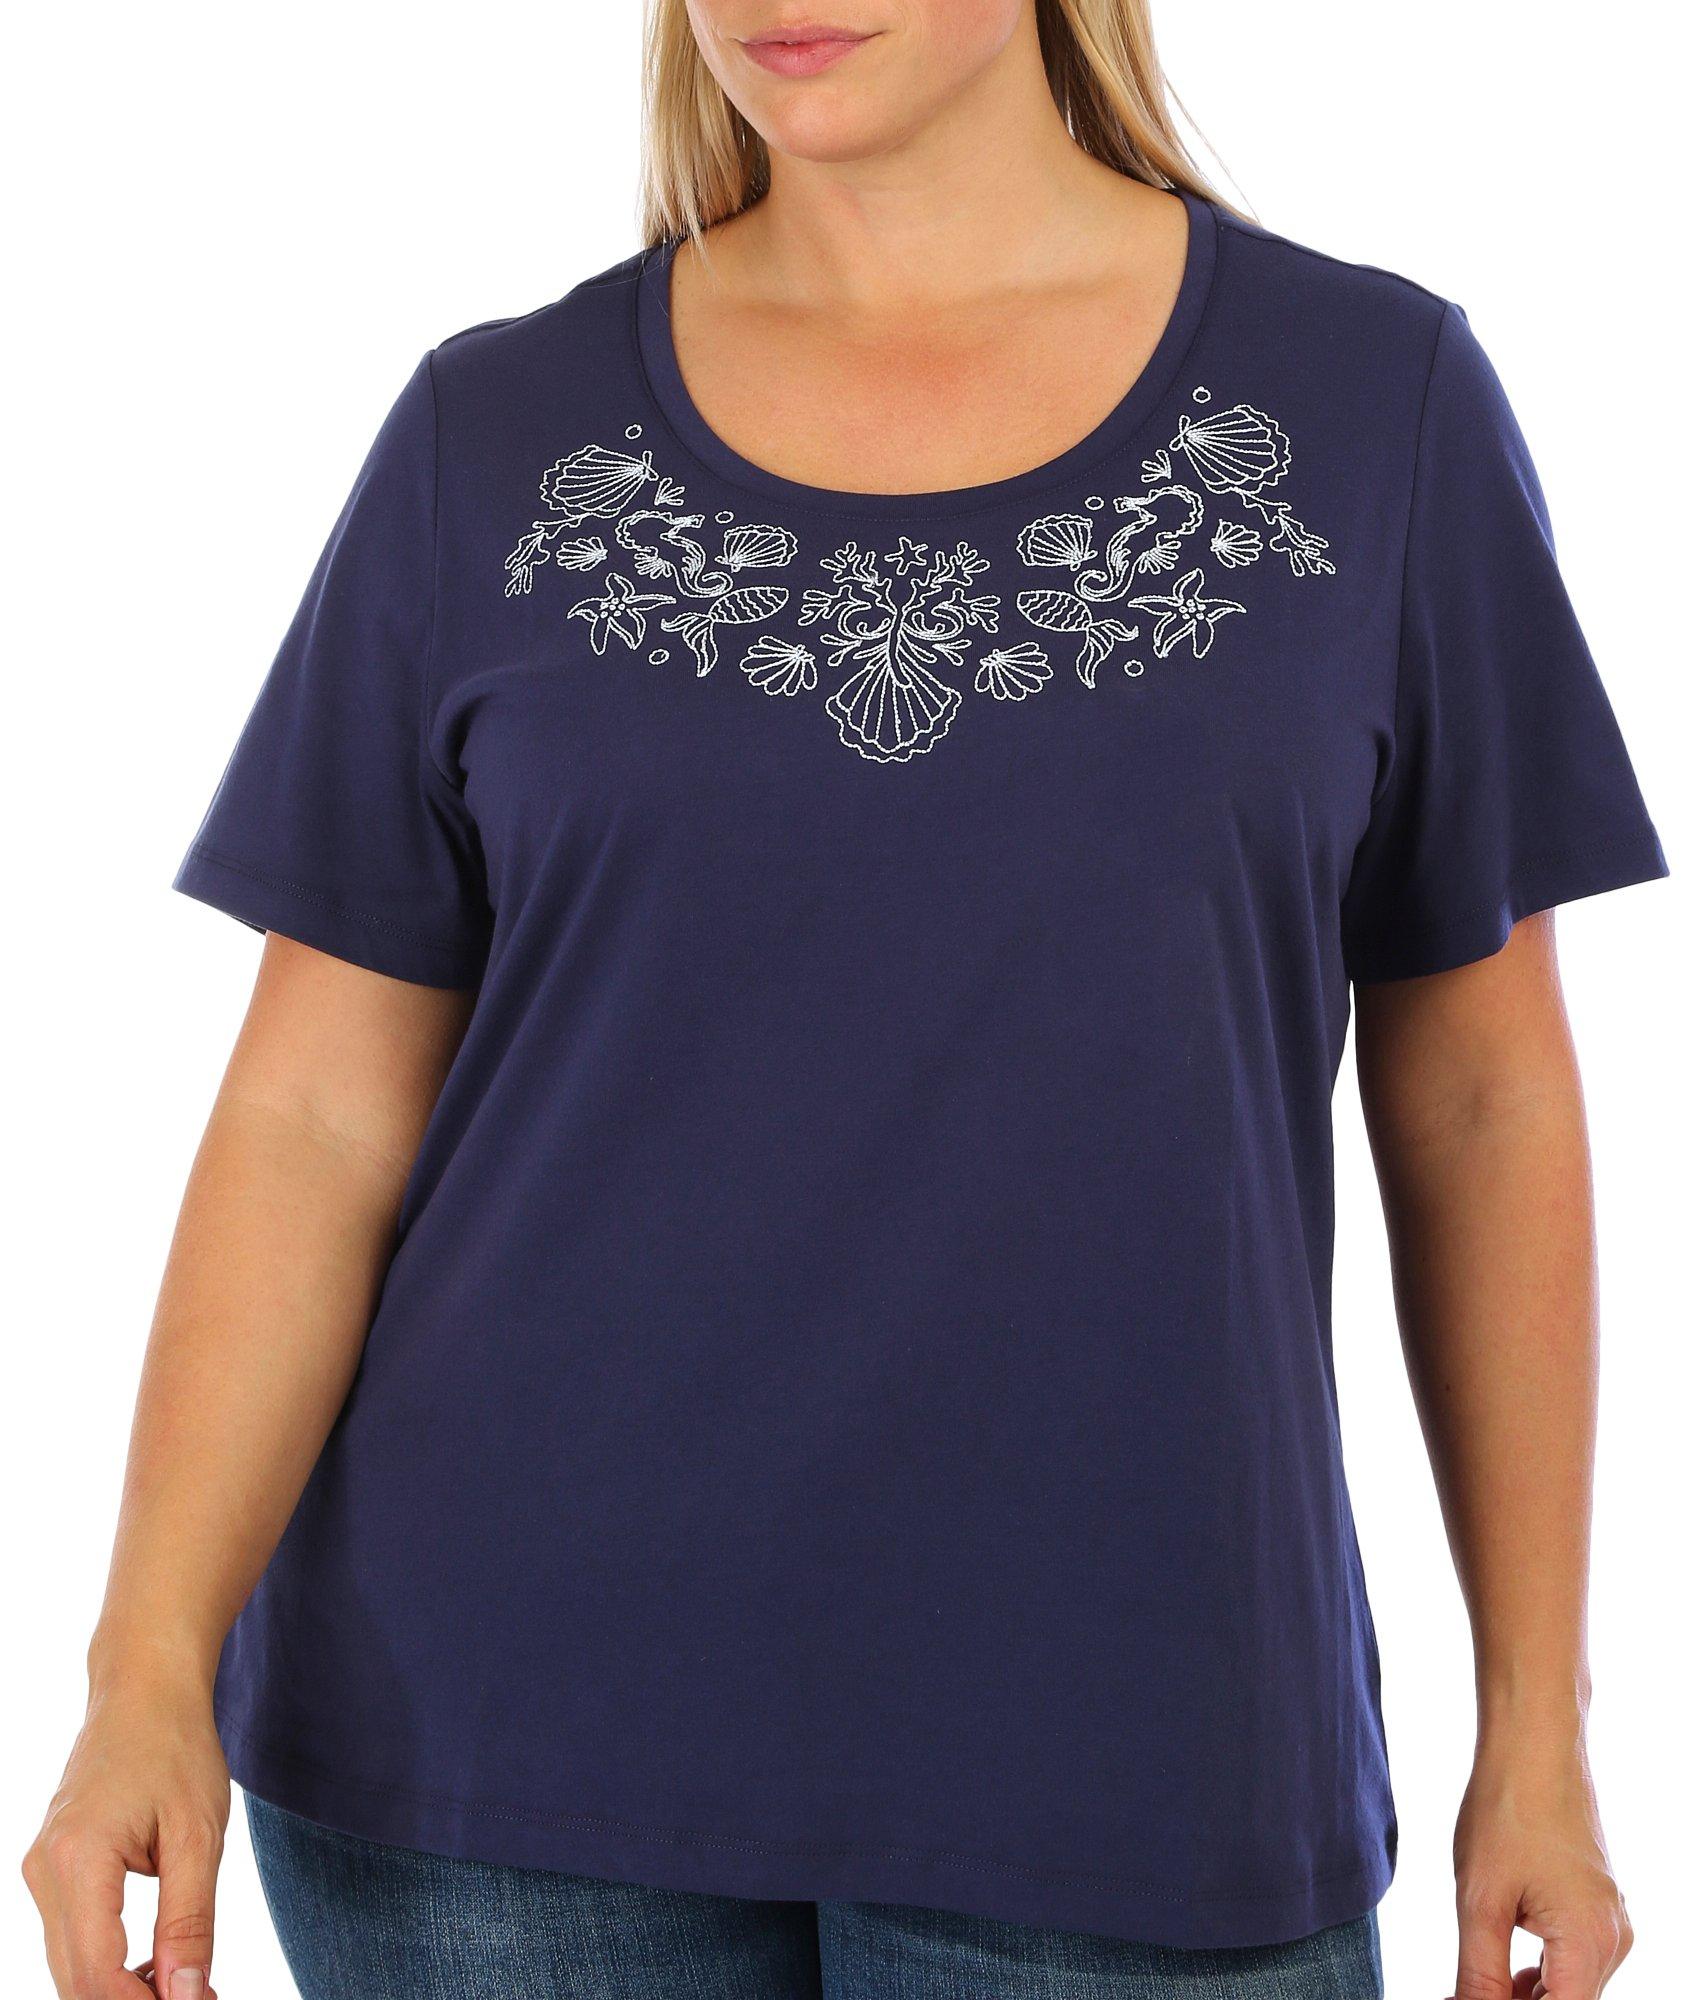 Coral Bay Plus Sealife Embroidery Short Sleeve Top